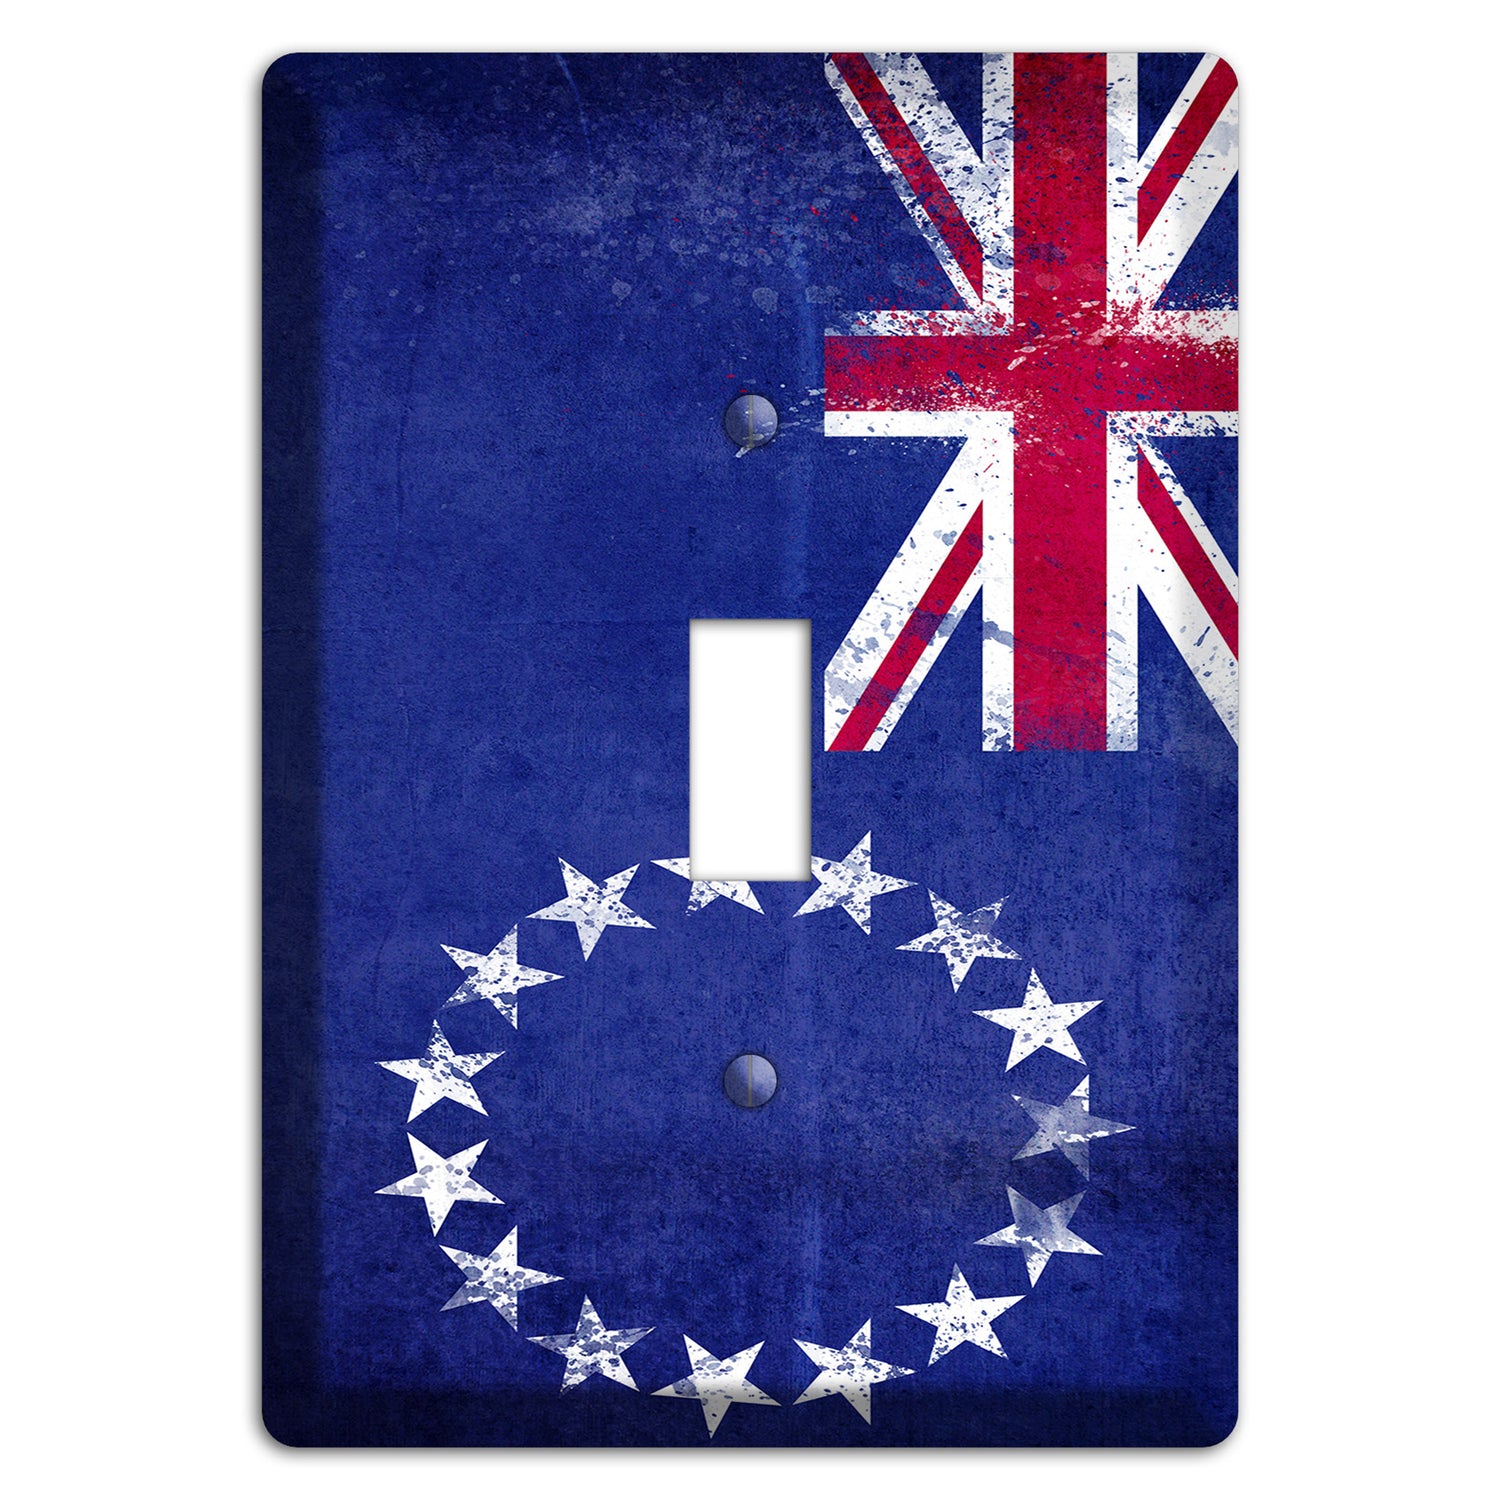 Cook Islands Cover Plates Cover Plates